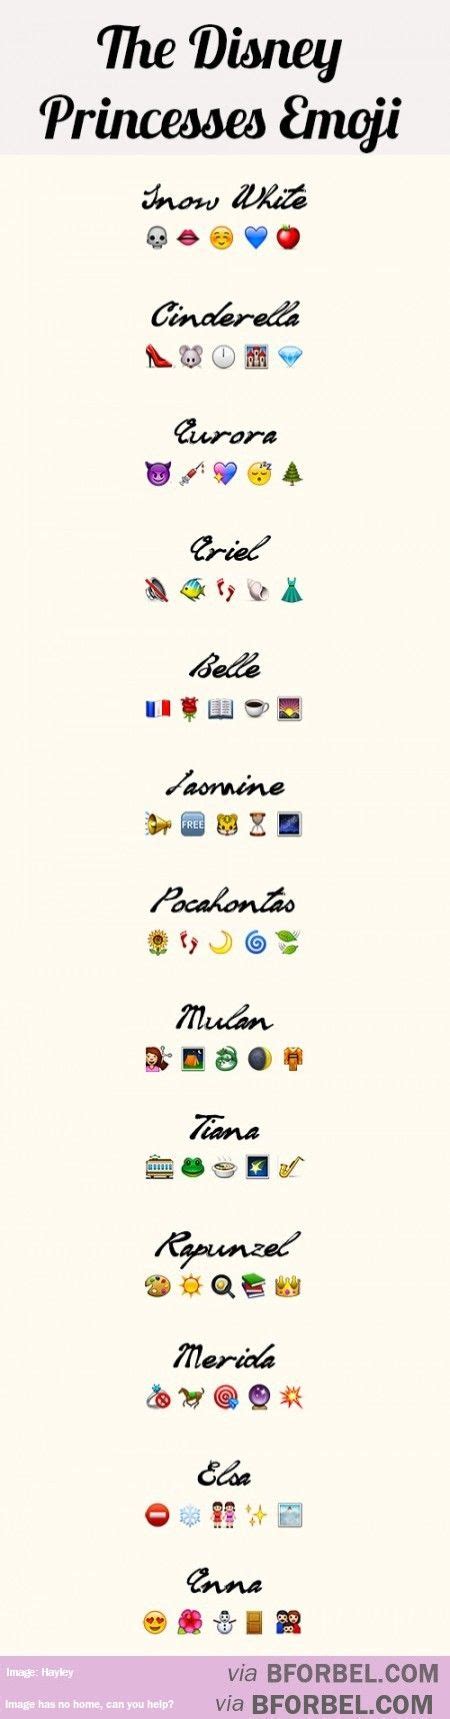 Devised by playbuzz, the puzzle challenges players to name all 13 of the cartoon films based on the sequence of emoticons. 13 Disney Princesses Described By Emojis… | Emojis ...